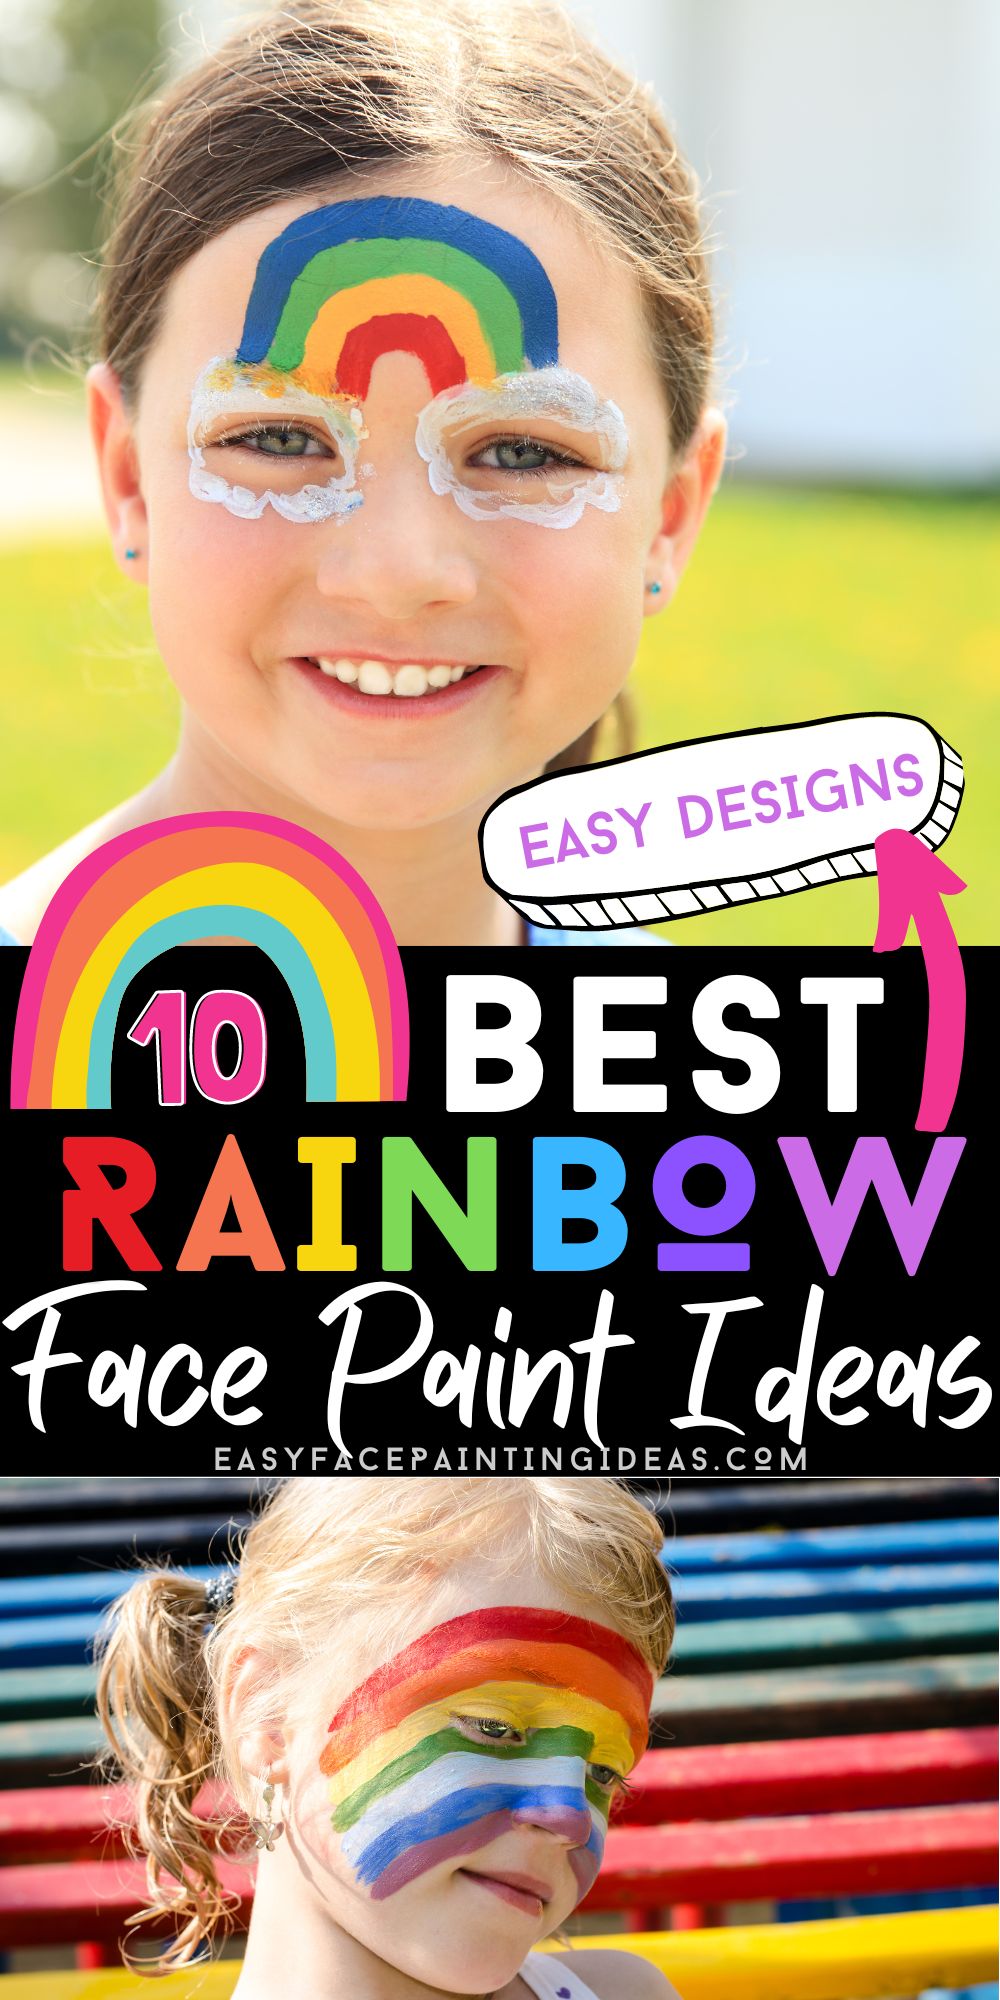 collage of two photos showing rainbow face painting ideas.